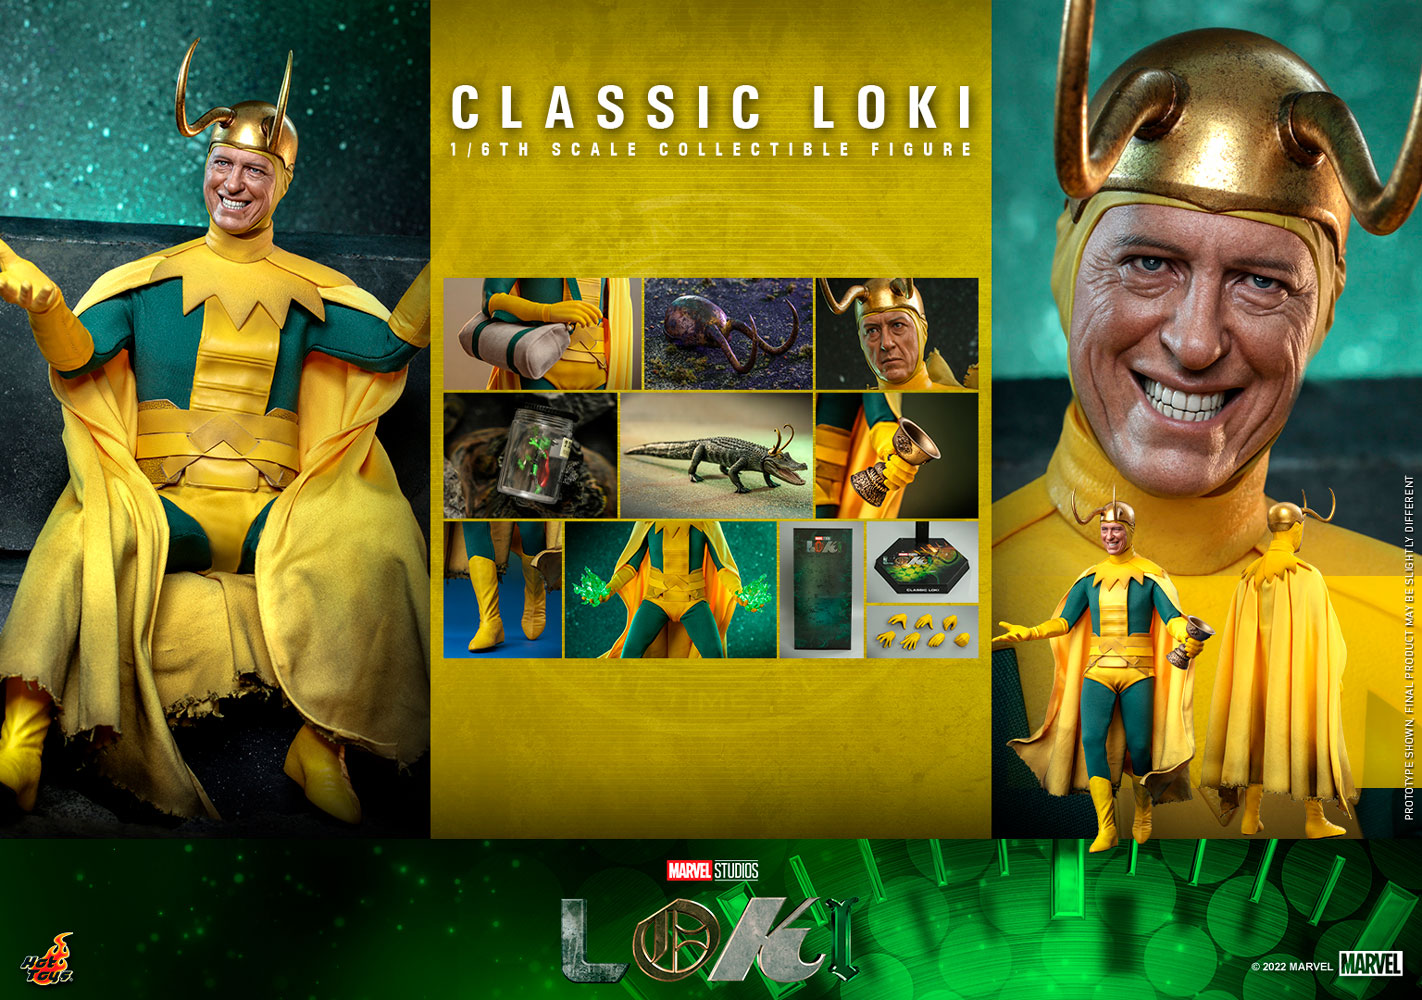 Classic Loki Sixth Scale Figure by Hot Toys